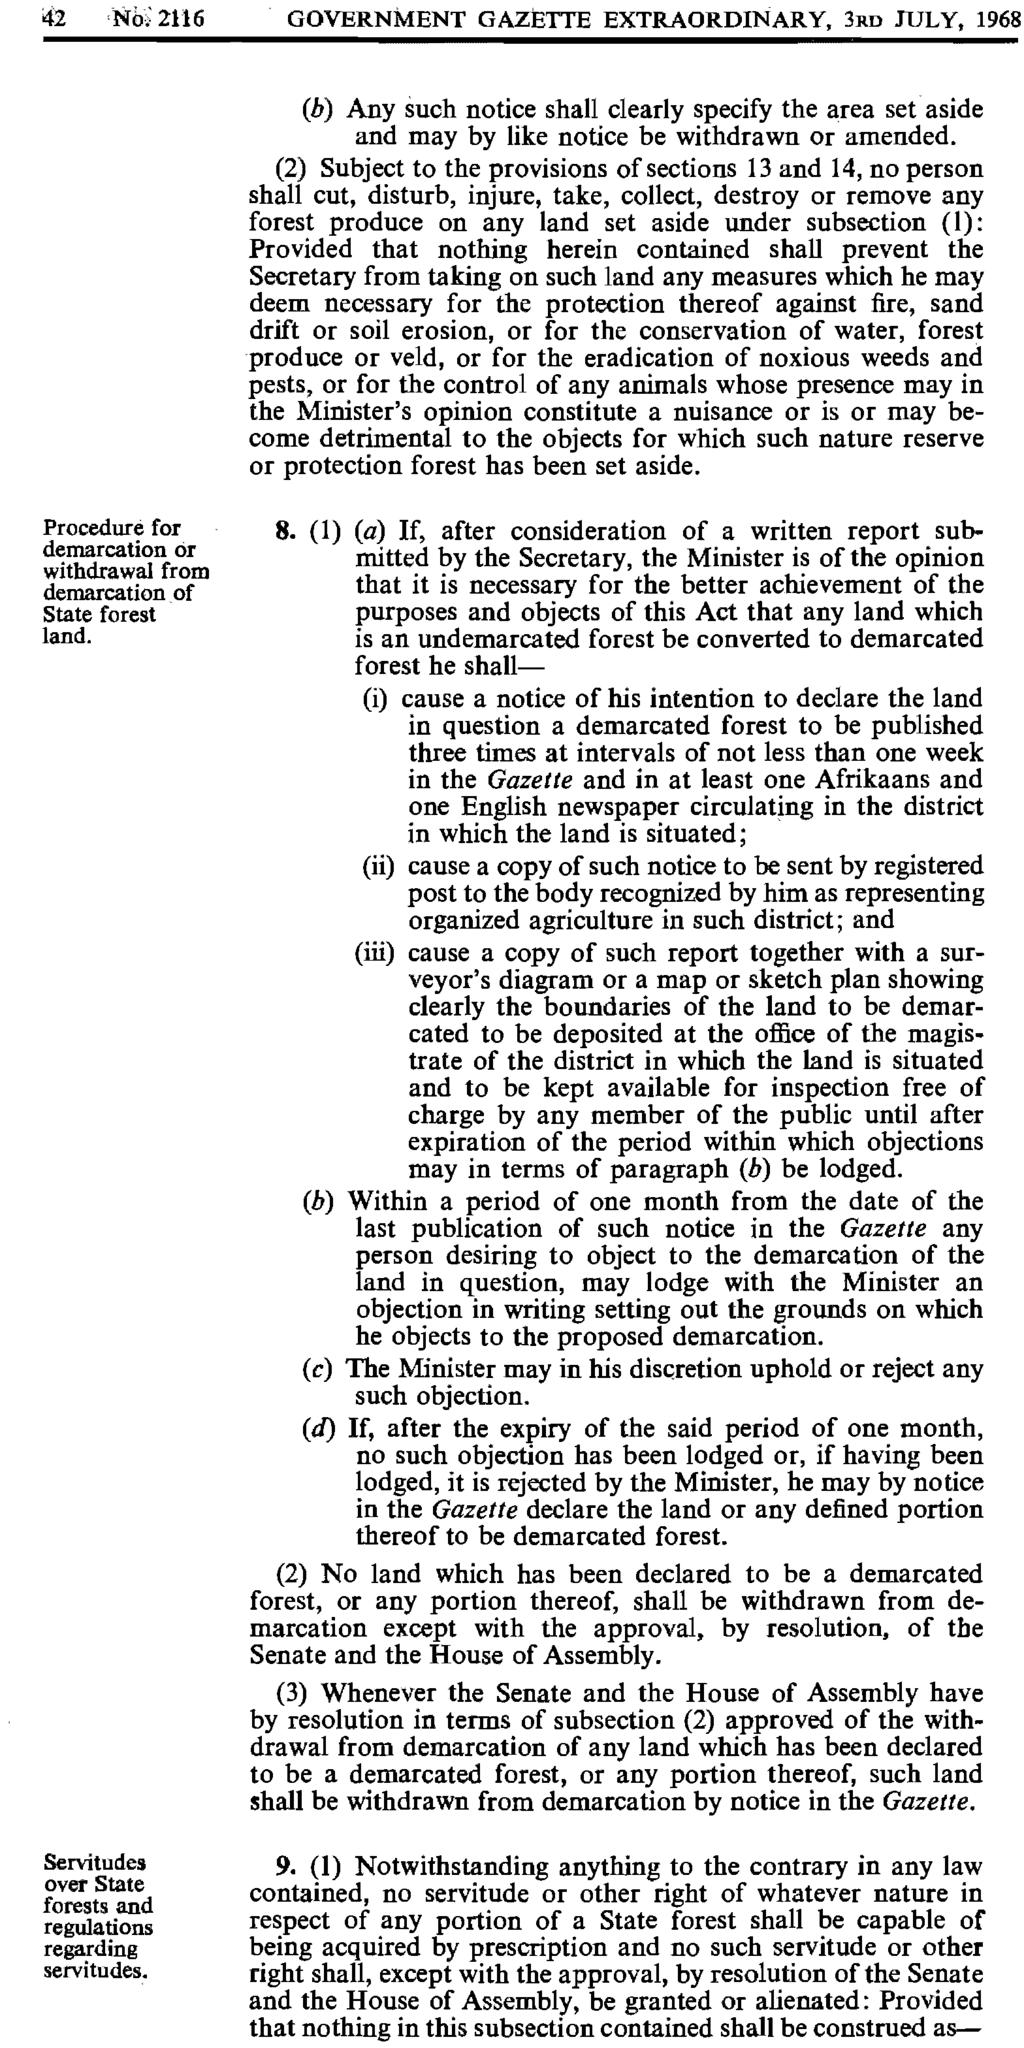 GOVERNMENT GAZETTE EXTRAORDINARY, 3RD JULY, 1968 (b) Any such notice shall clearly specify the area set aside and may by like notice be withdrawn or amended.